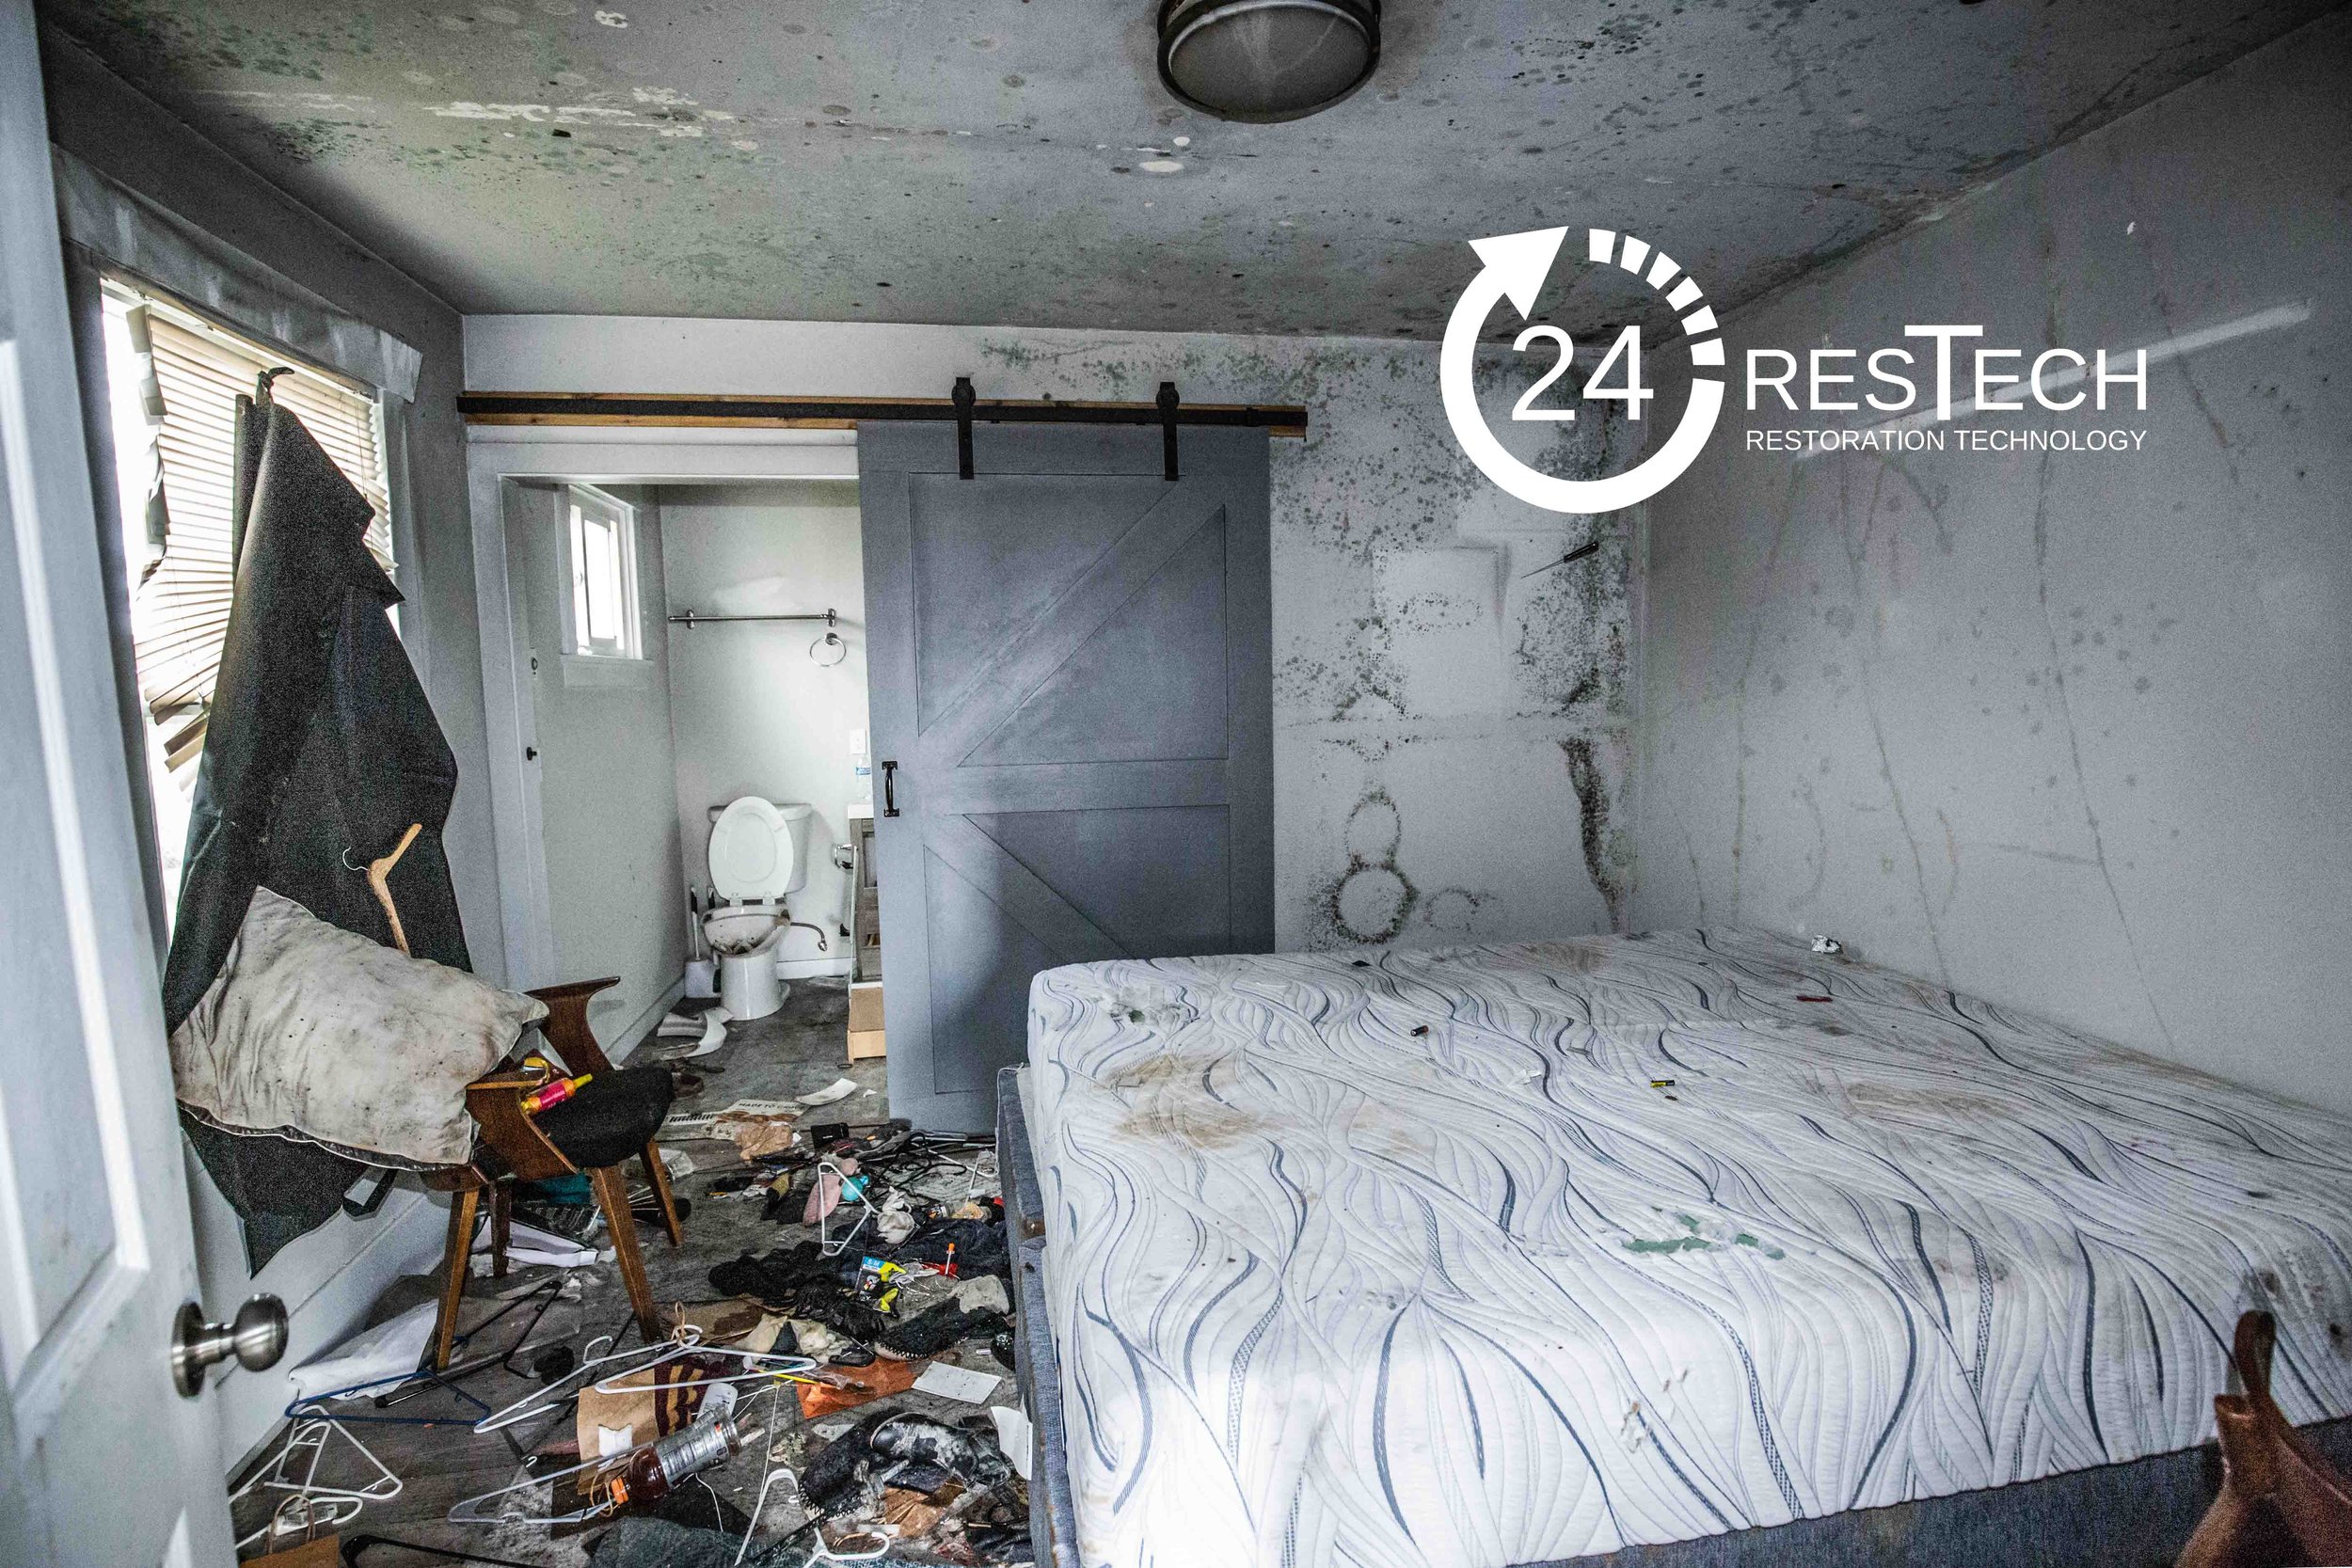 24ResTech's Fire Damage Restoration Project - Bedroom and Bathroom Restoration, Smoke Removal, Pack-Out Services